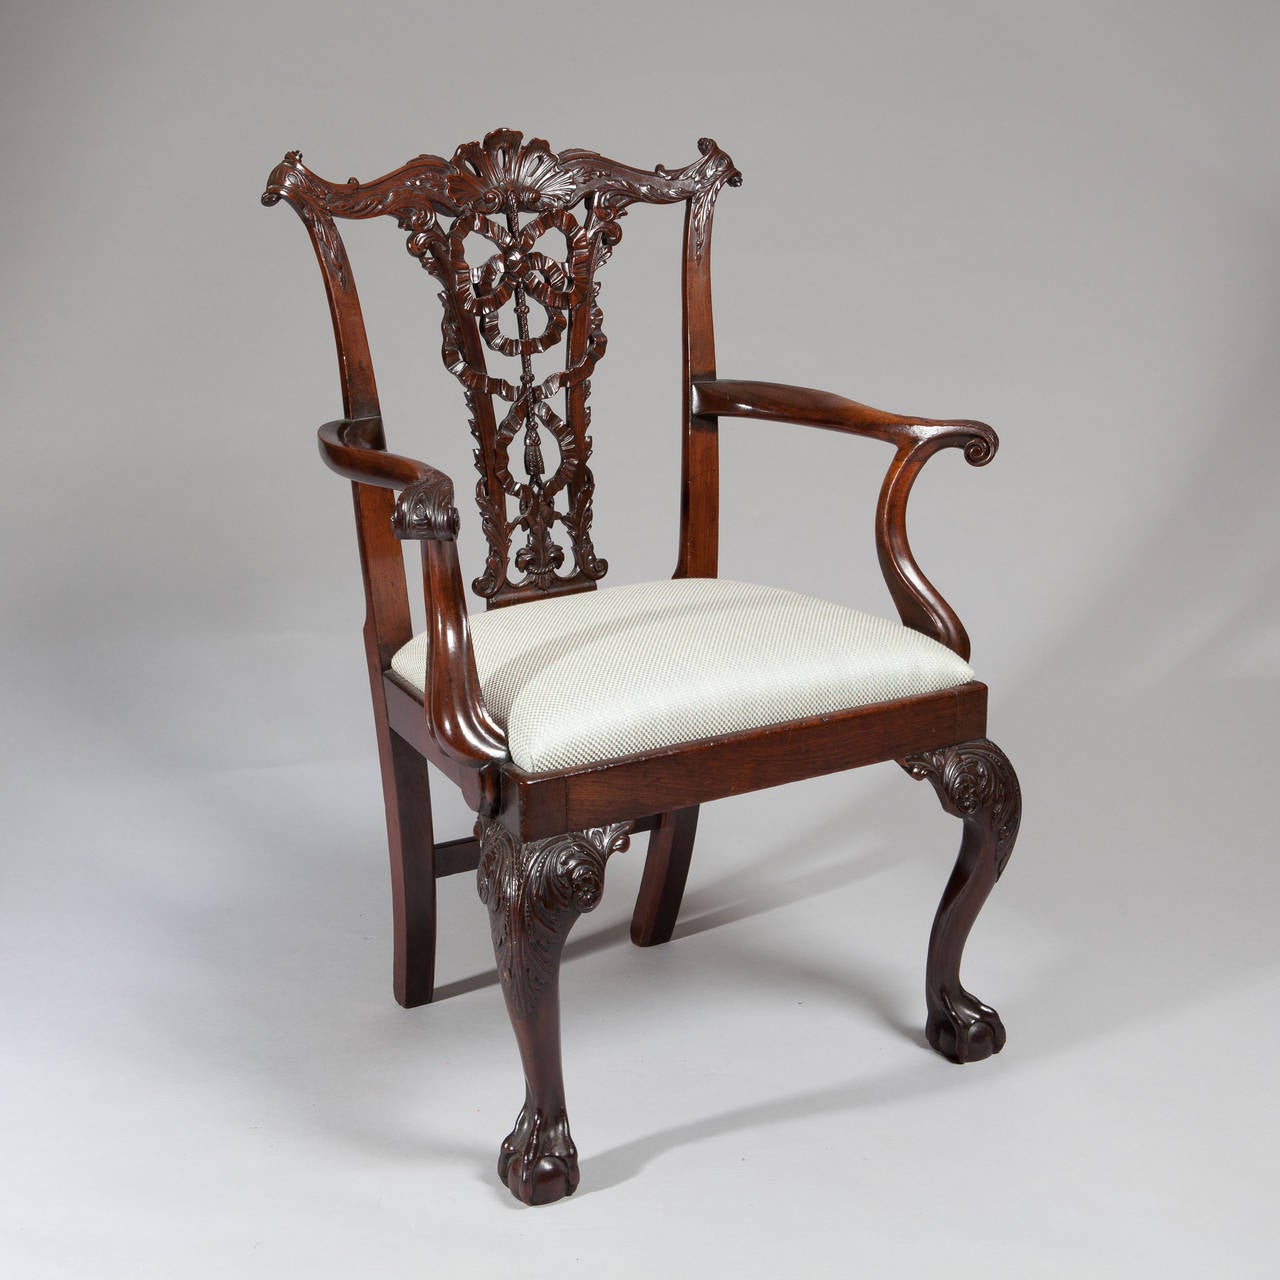 A pair of 19th century Chippendale armchairs, the open carved splats with intertwined ribbons and foliage, the top rails with acanthus leaves and scrolls, the exaggerated arms sweeping forward with great extravagance to scrolled ends, the chairs